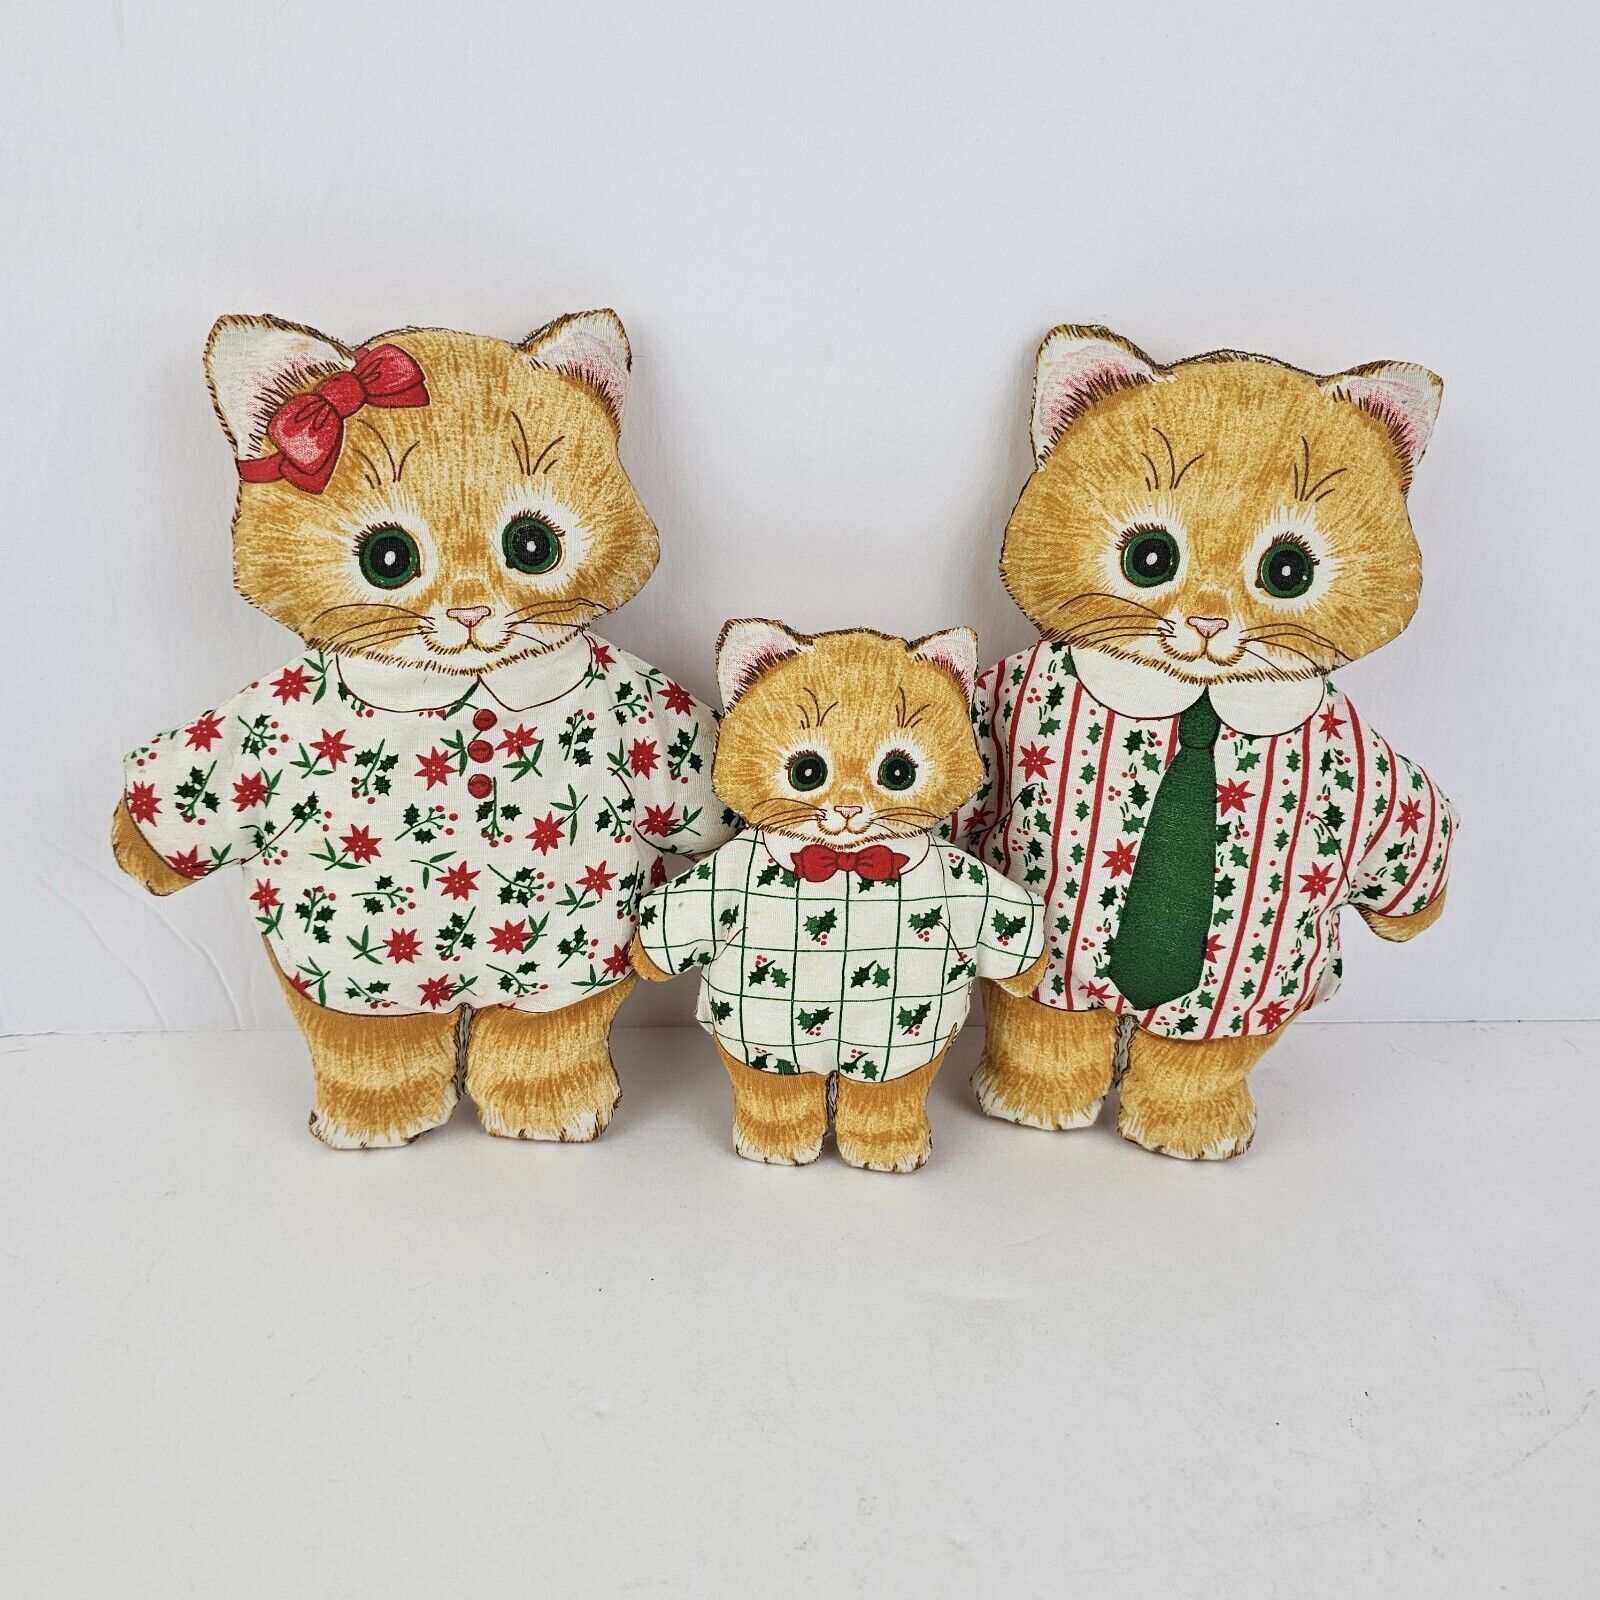 Vintage Three Little Kittens Pillow Doll Cut Sew Christmas Cat in Pajamas 1980s